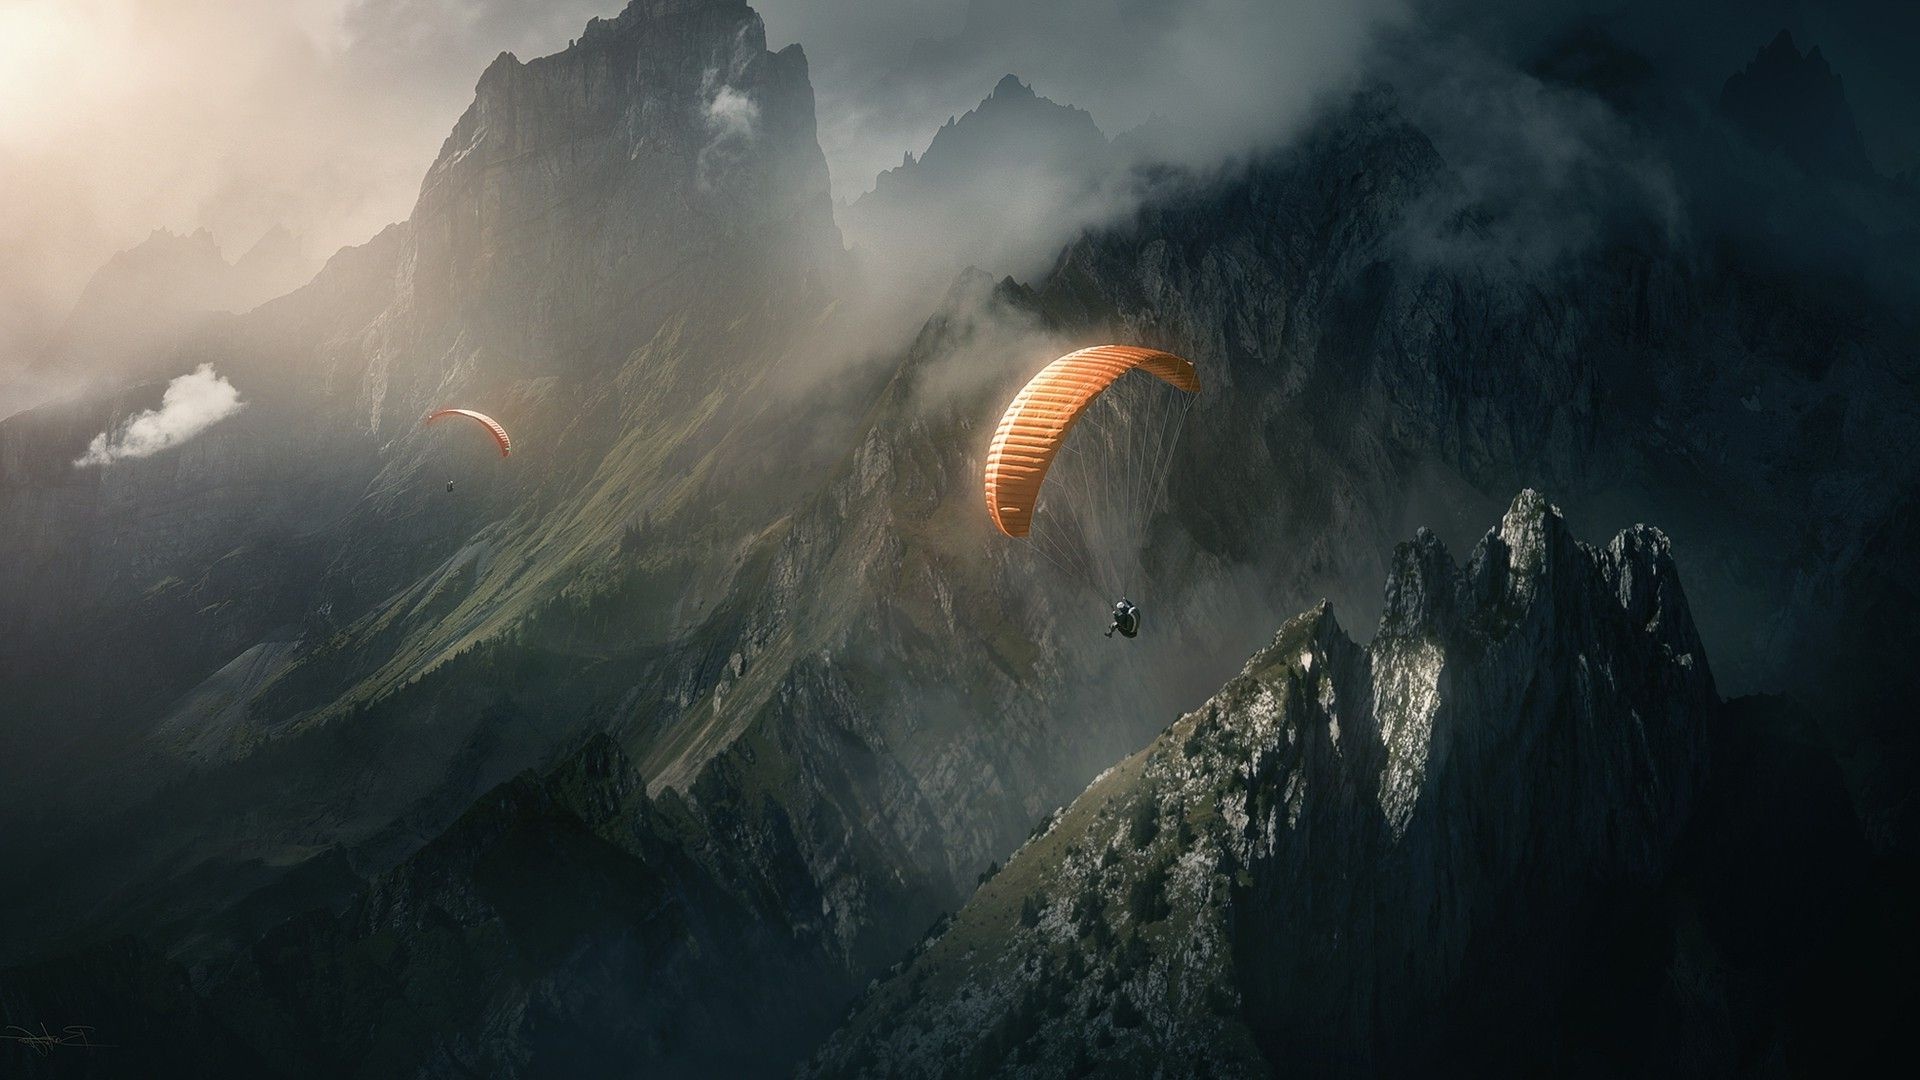 Paragliding: Adventure sport in the mountains, Extreme windsports, Operated parachutes. 1920x1080 Full HD Background.